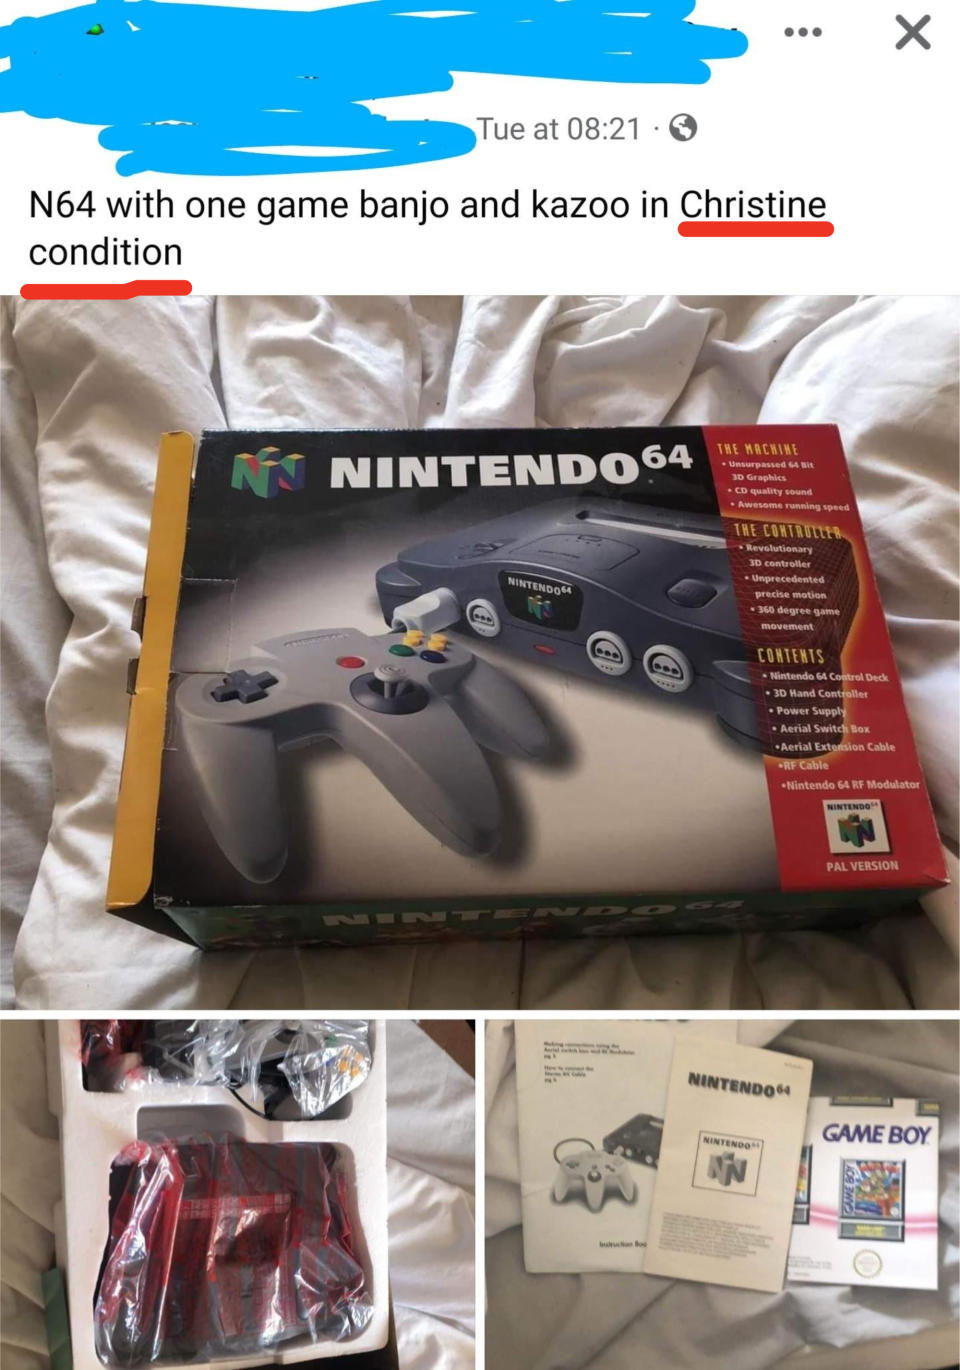 Person advertising a Nintendo product in "Christine" condition instead of pristine